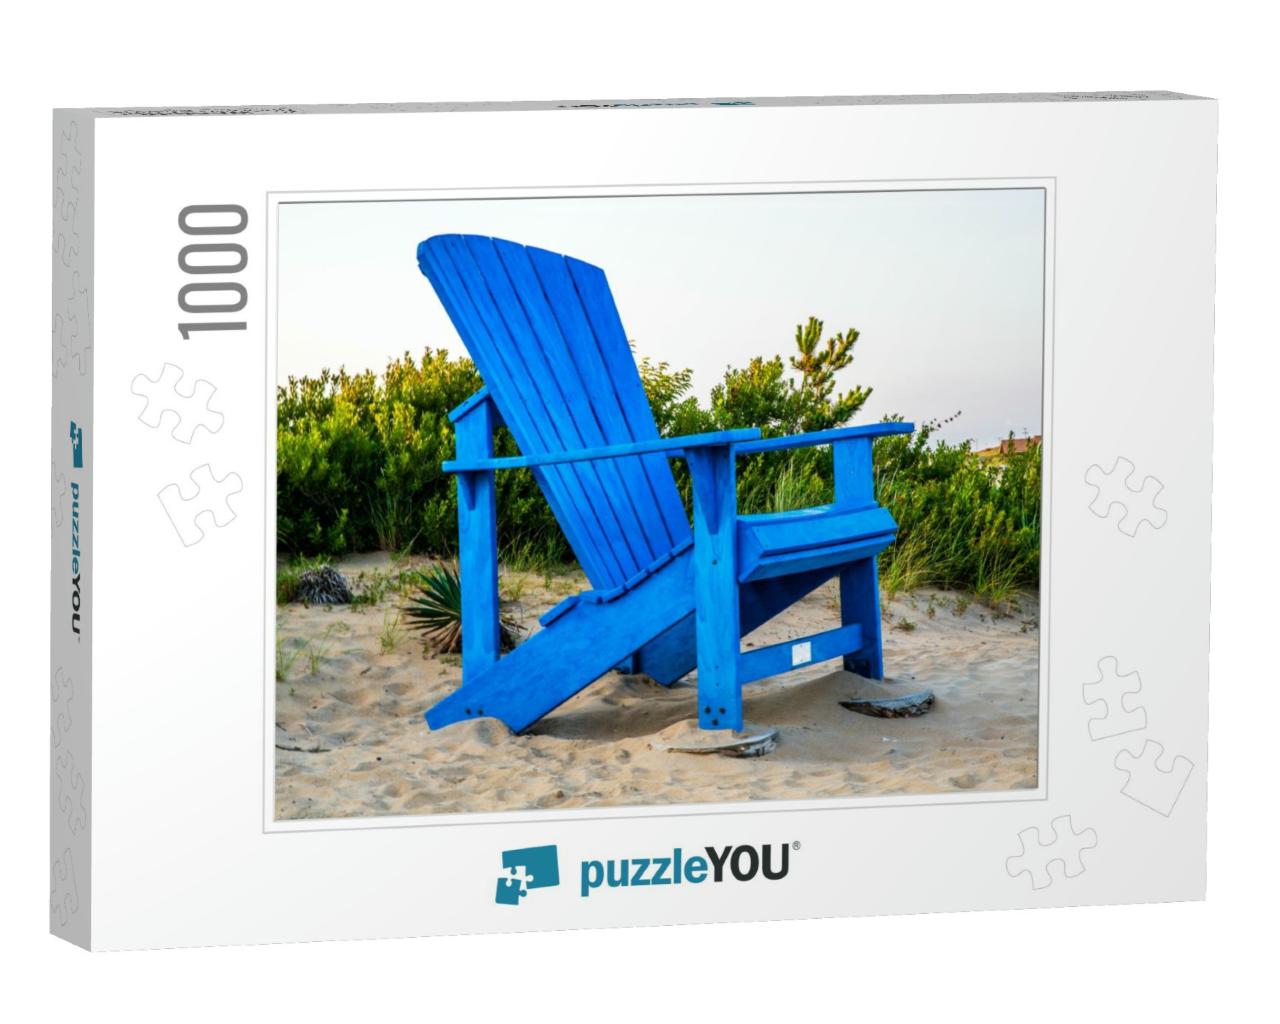 A Giant Blue Adirondack Chair At Sandbridge in Virginia B... Jigsaw Puzzle with 1000 pieces